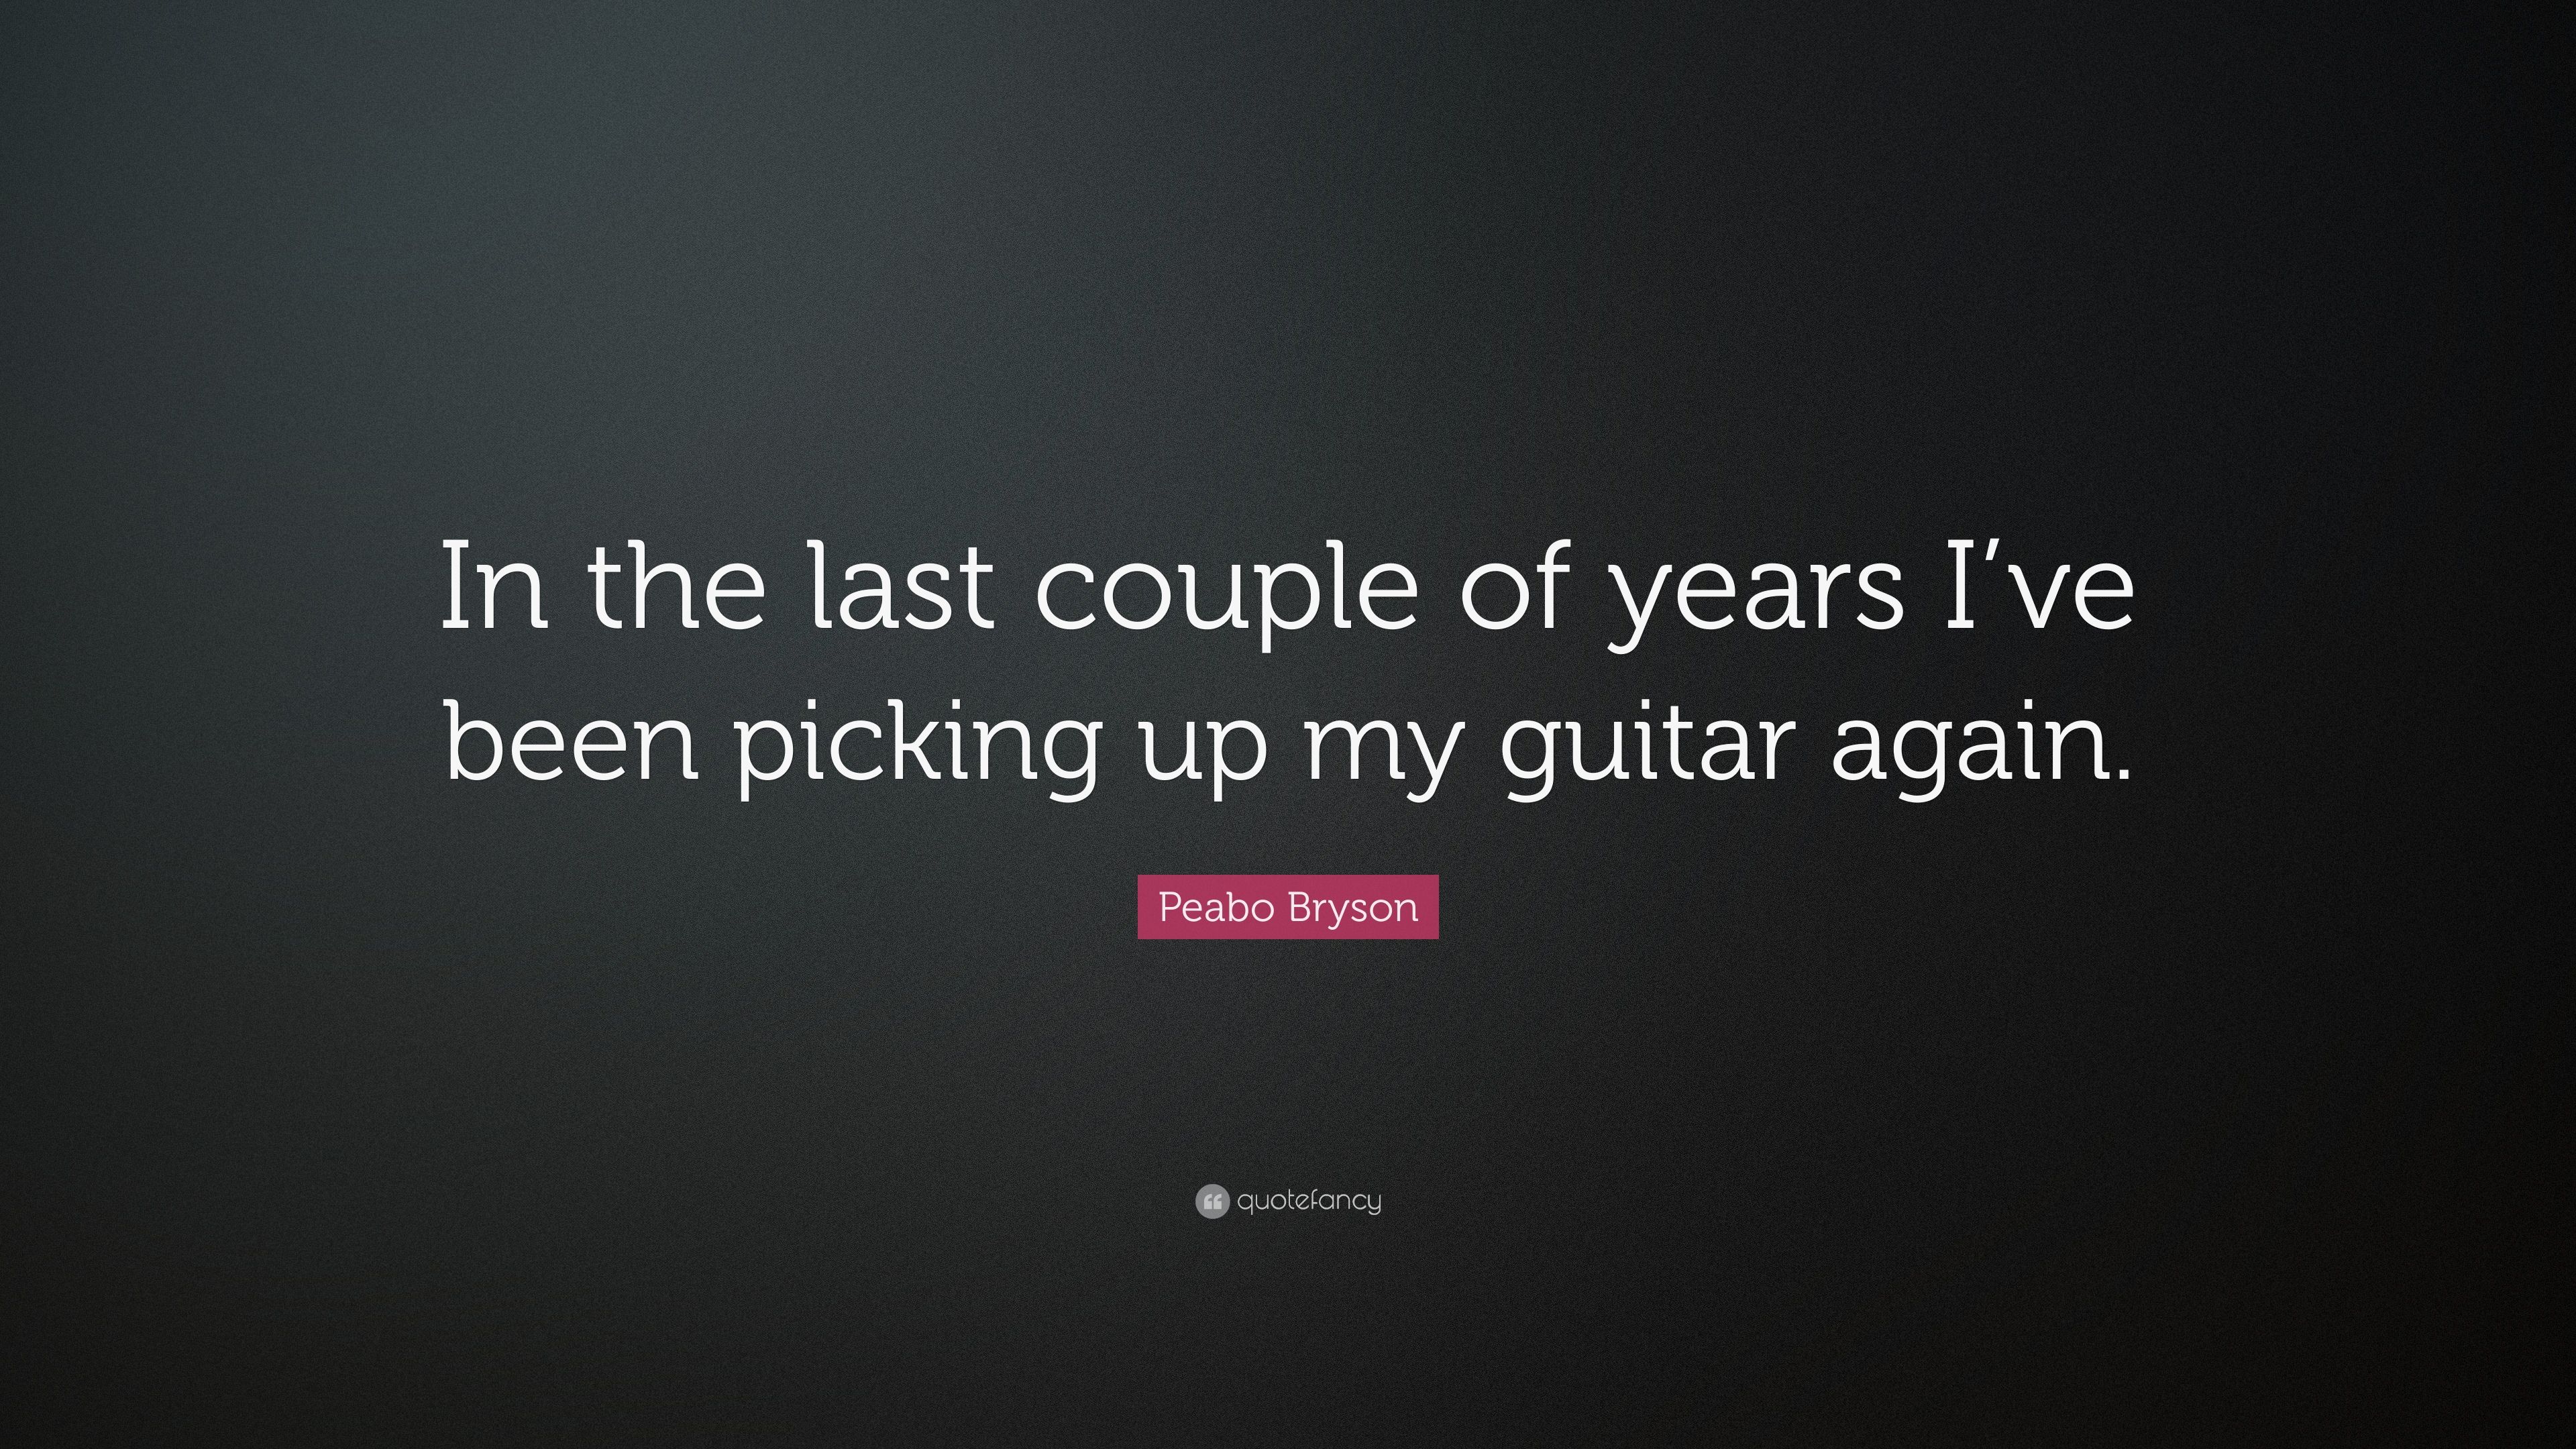 Peabo Bryson Quote: “In the last couple of years I've been picking